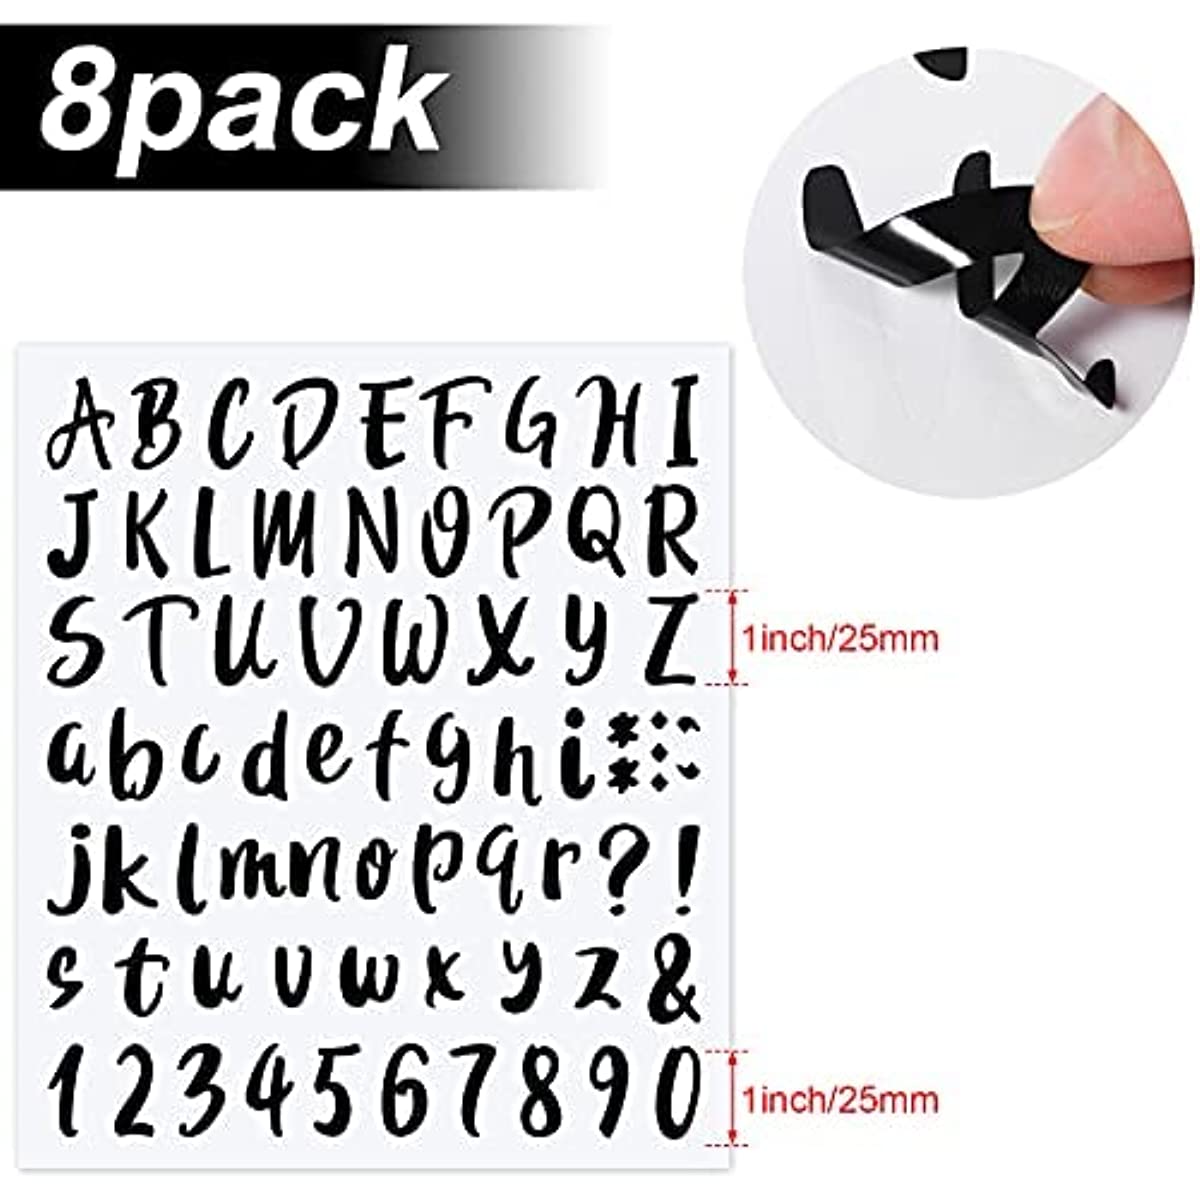 1-2 Inch Letter Stickers Sticky Sticker Adhesive Letters DIY